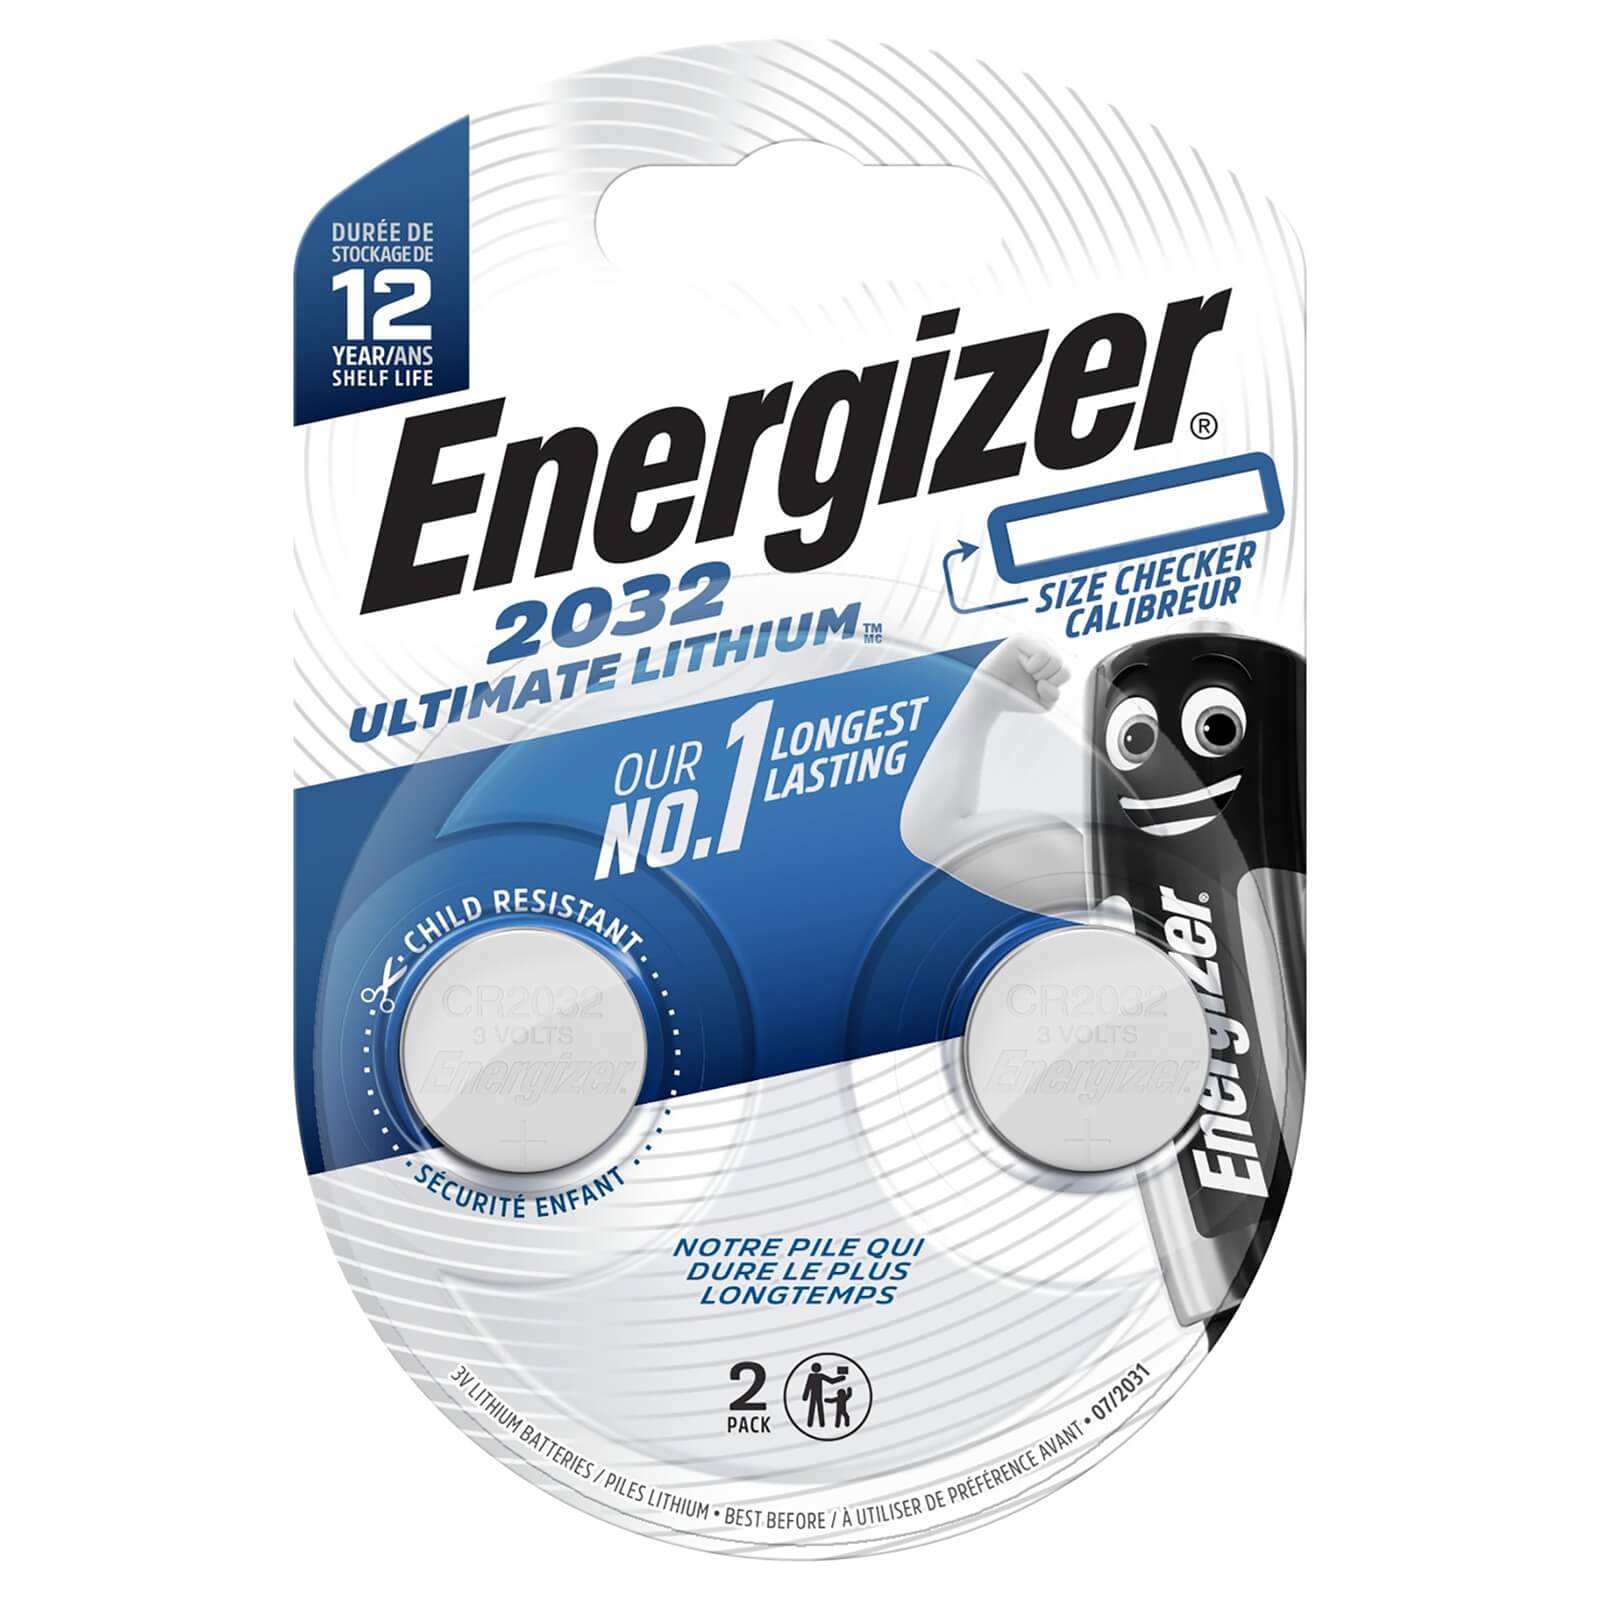 Energizer CR2032 Ultimate Lithium Coin Battery - 2 Pack